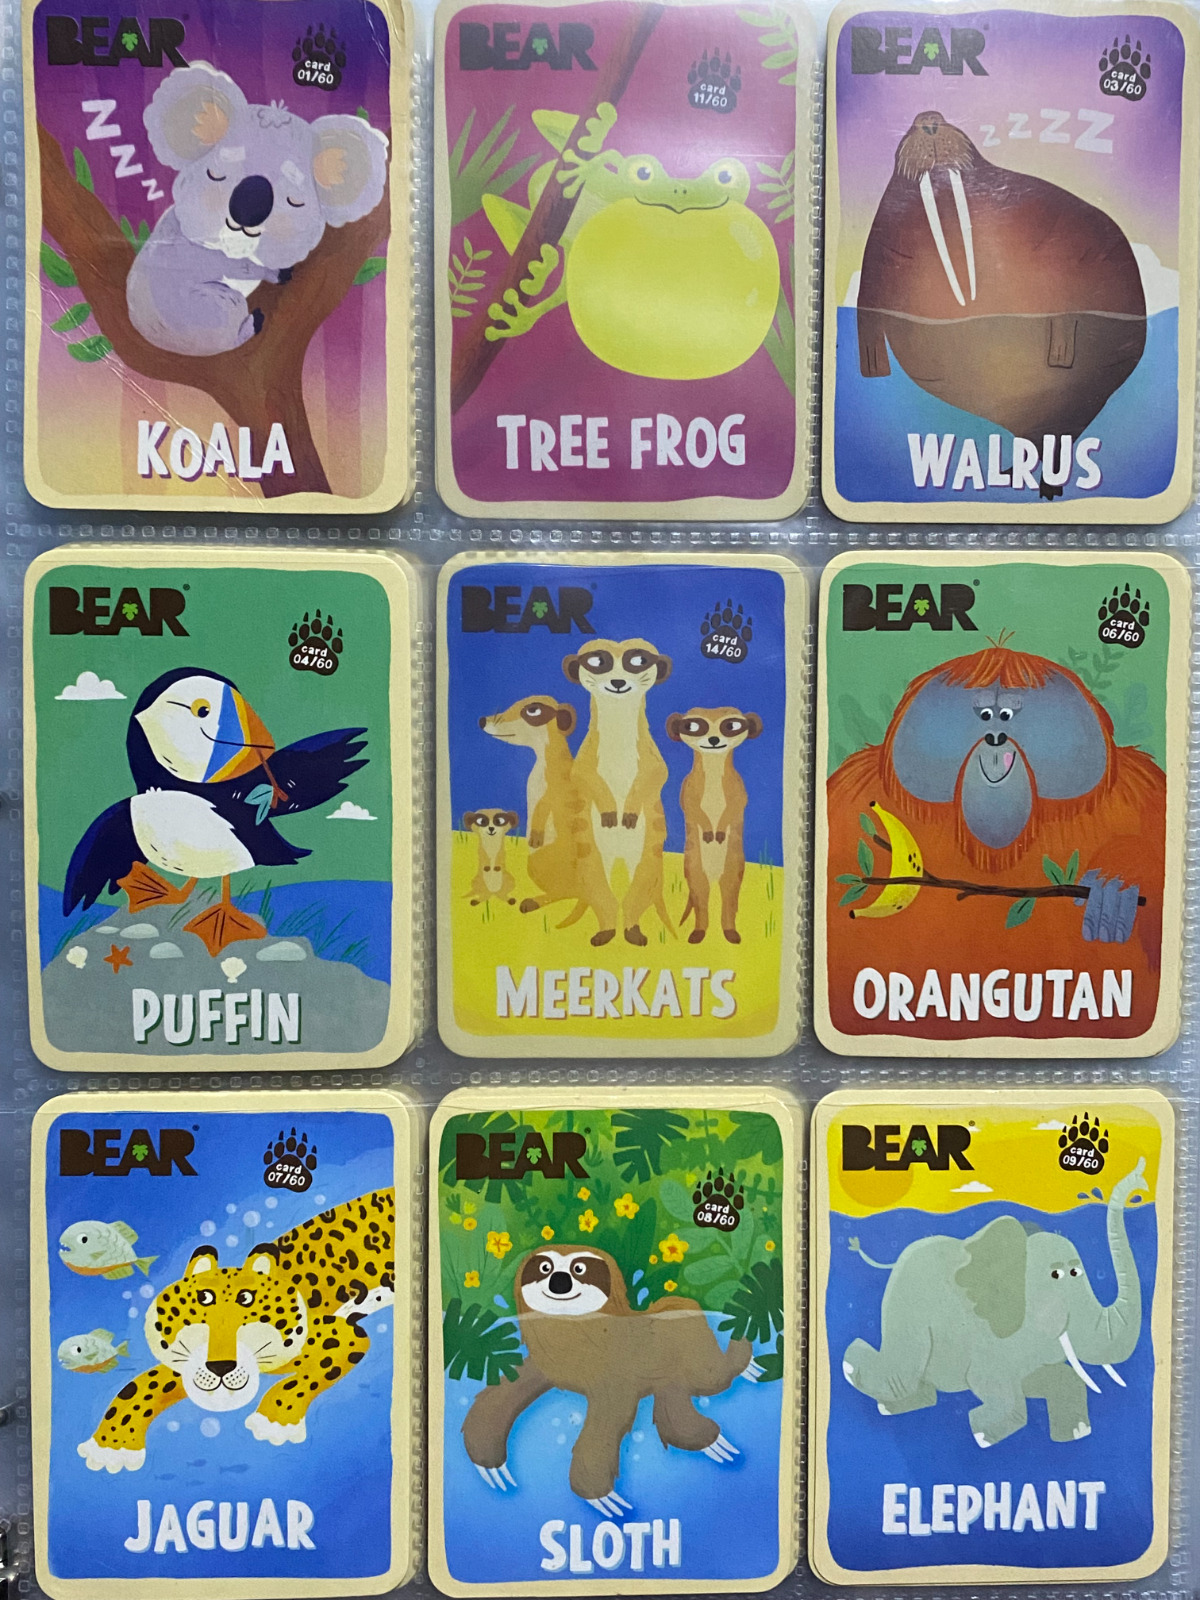 BEAR Fruit Snacks Collectible Animal Trading Cards - Complete Your Set New/Mint